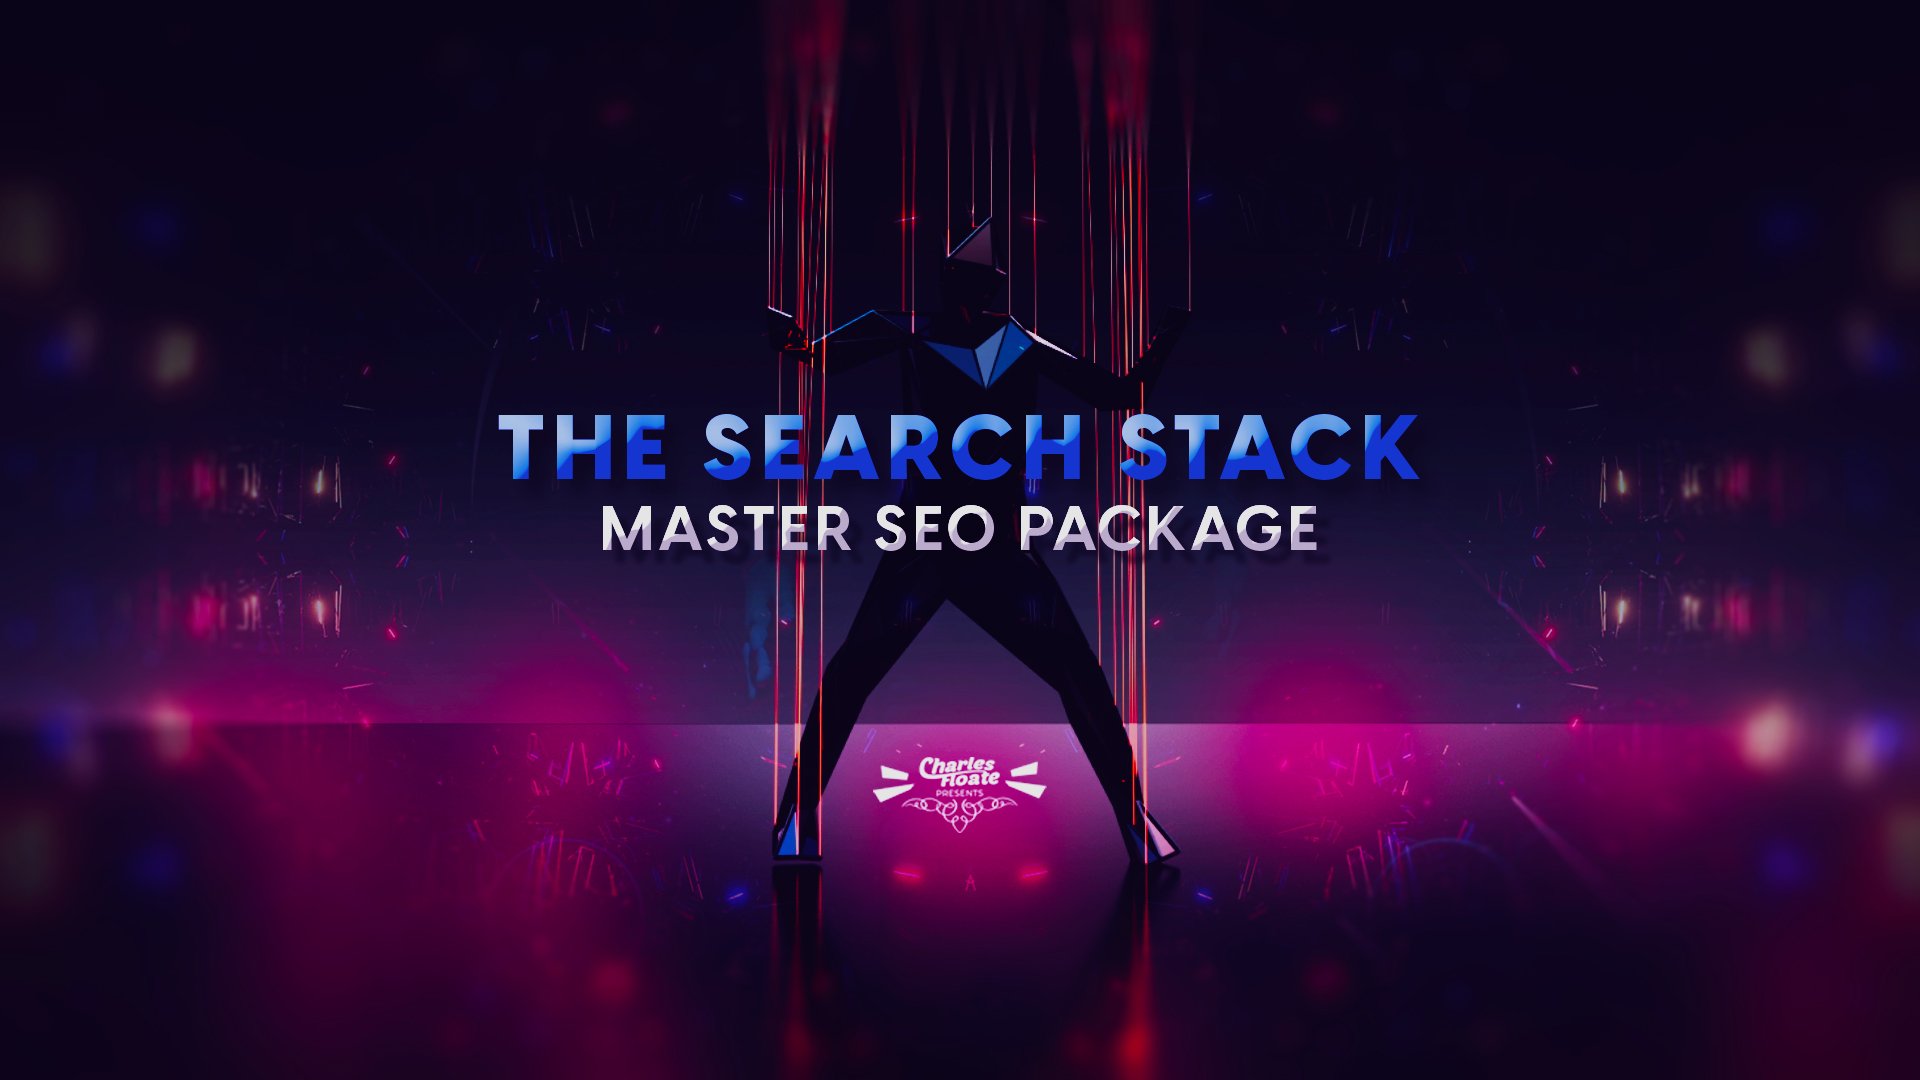 The Search Stack: Master SEO Package By Charles Floate